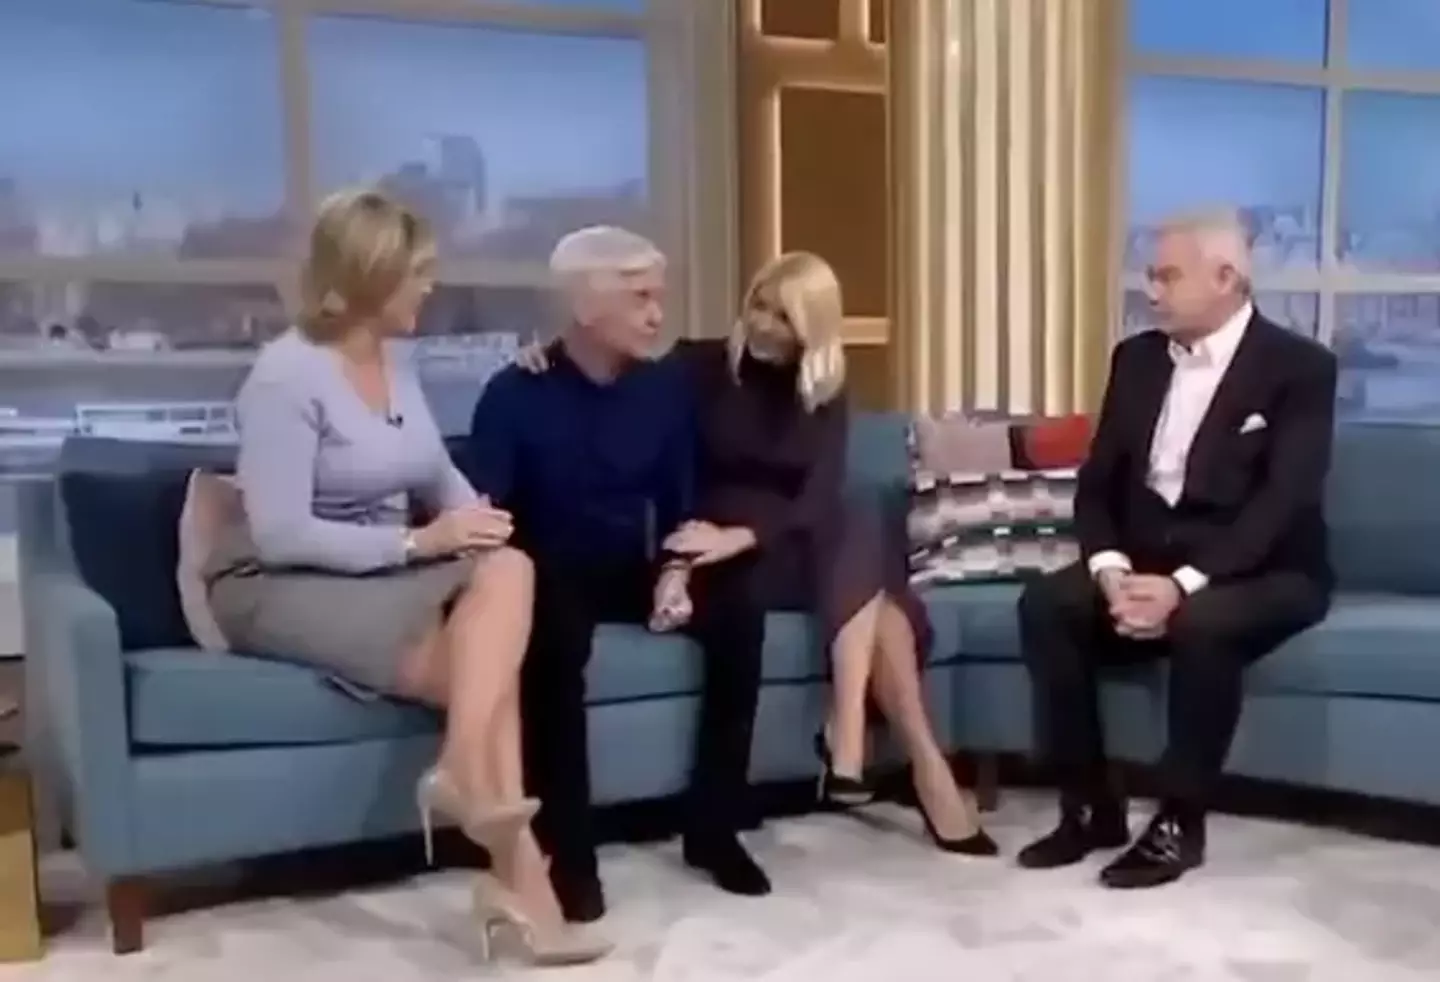 Eamonn Holmes was formerly a presenter on This Morning at the same time as Phillip Schofield and Holly Willoughby.